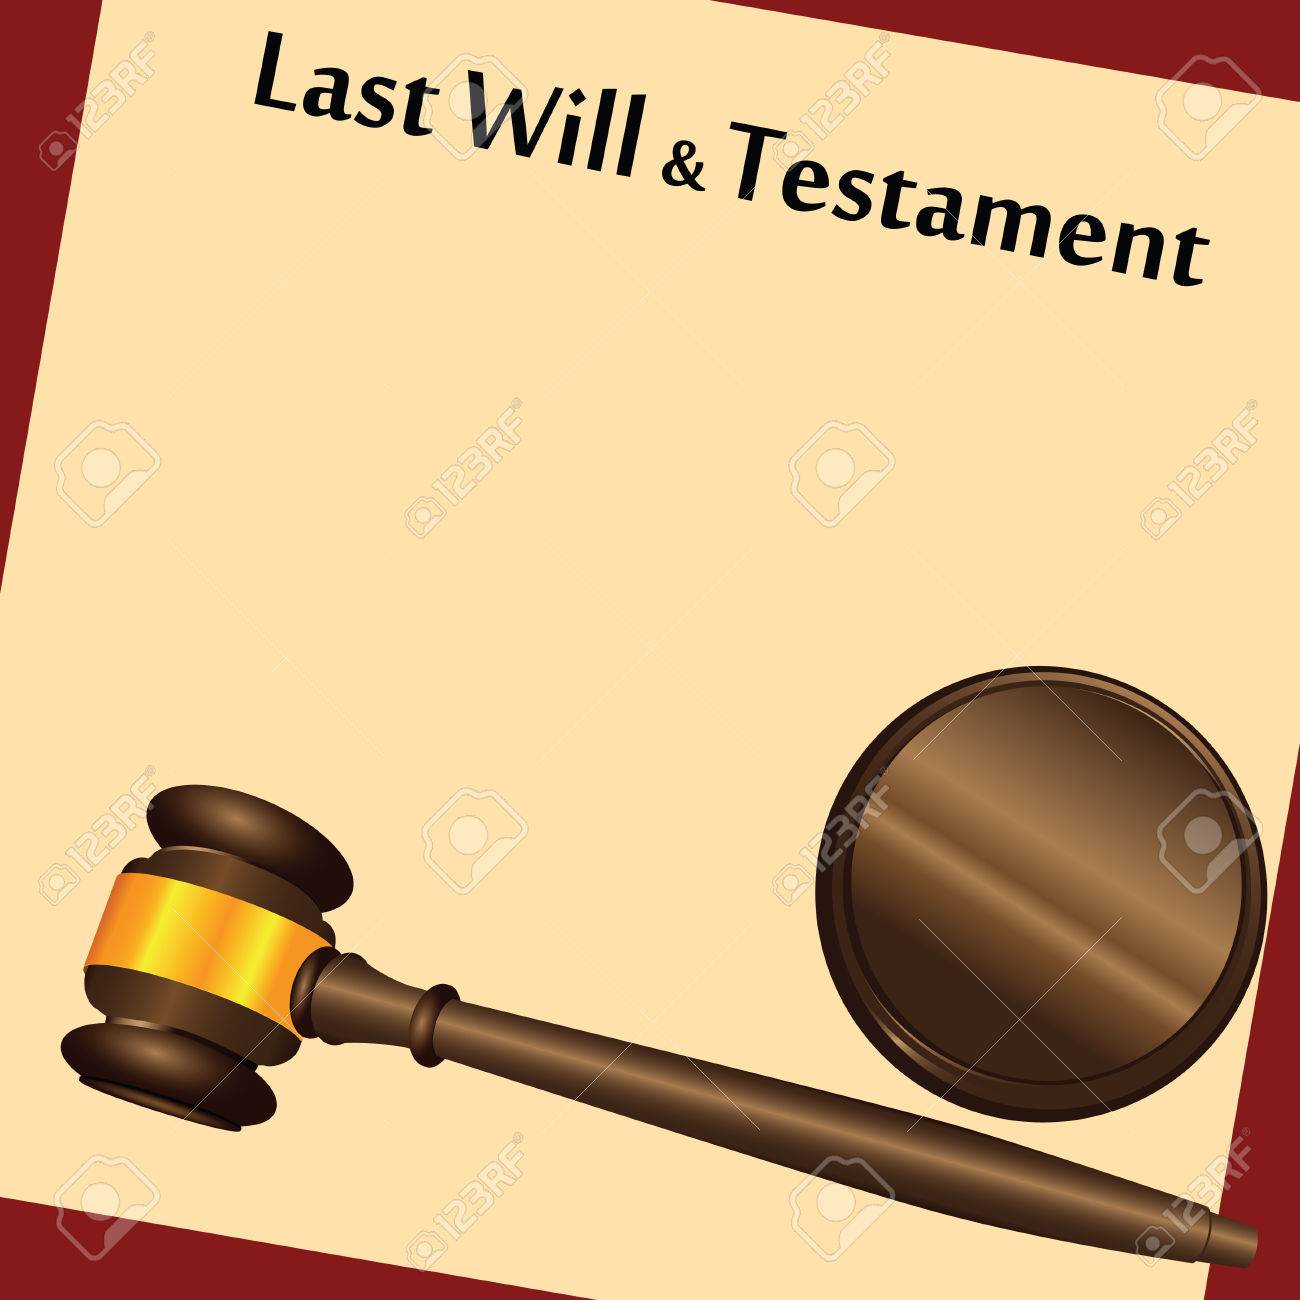 Gavel On Top Of A Last Will And Testament Contract With